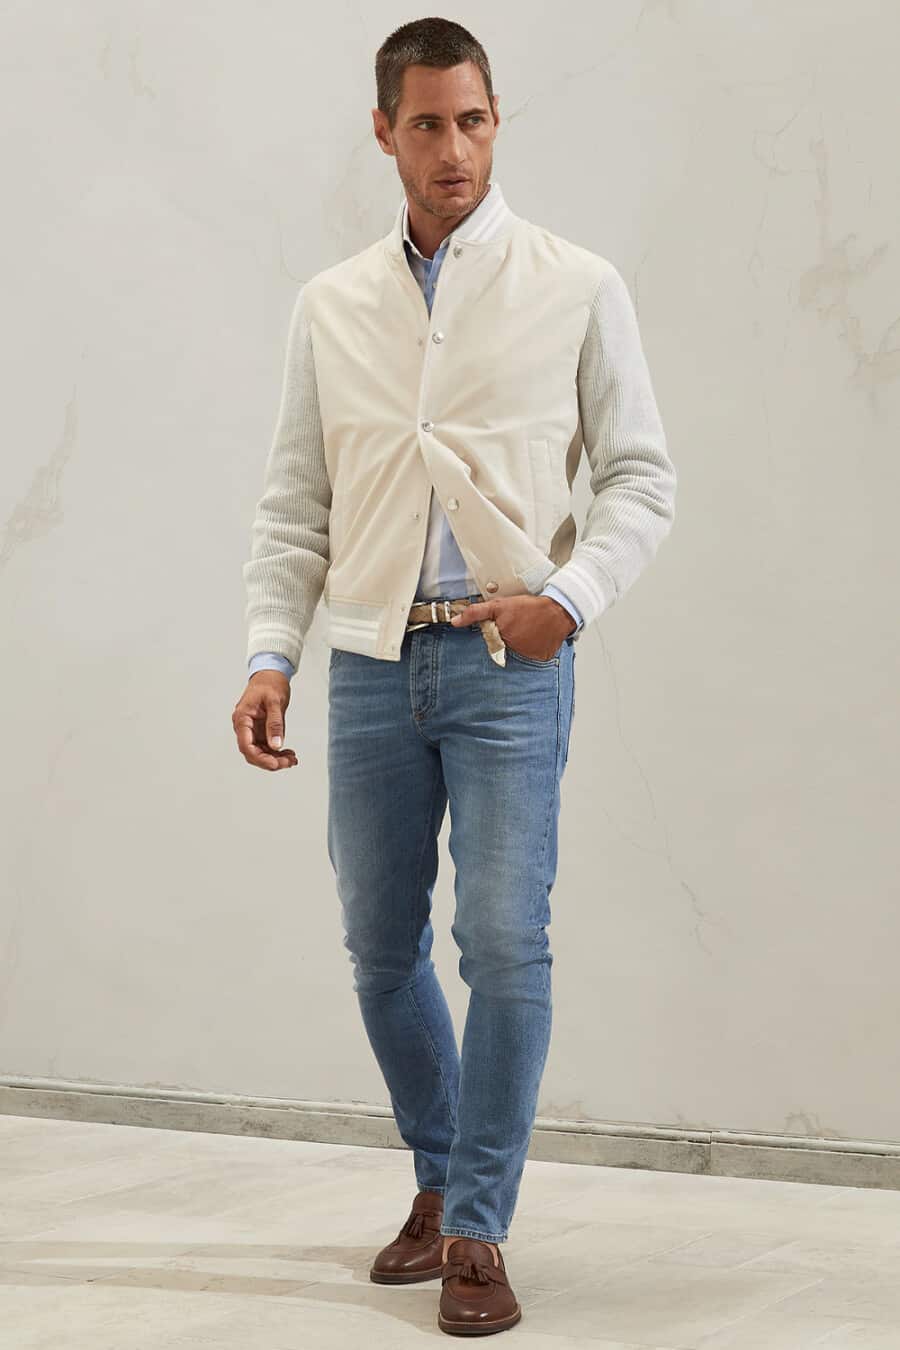 Men's mid-wash jeans, striped shirt, cream varsity jacket and brown leather tassel loafers outfit